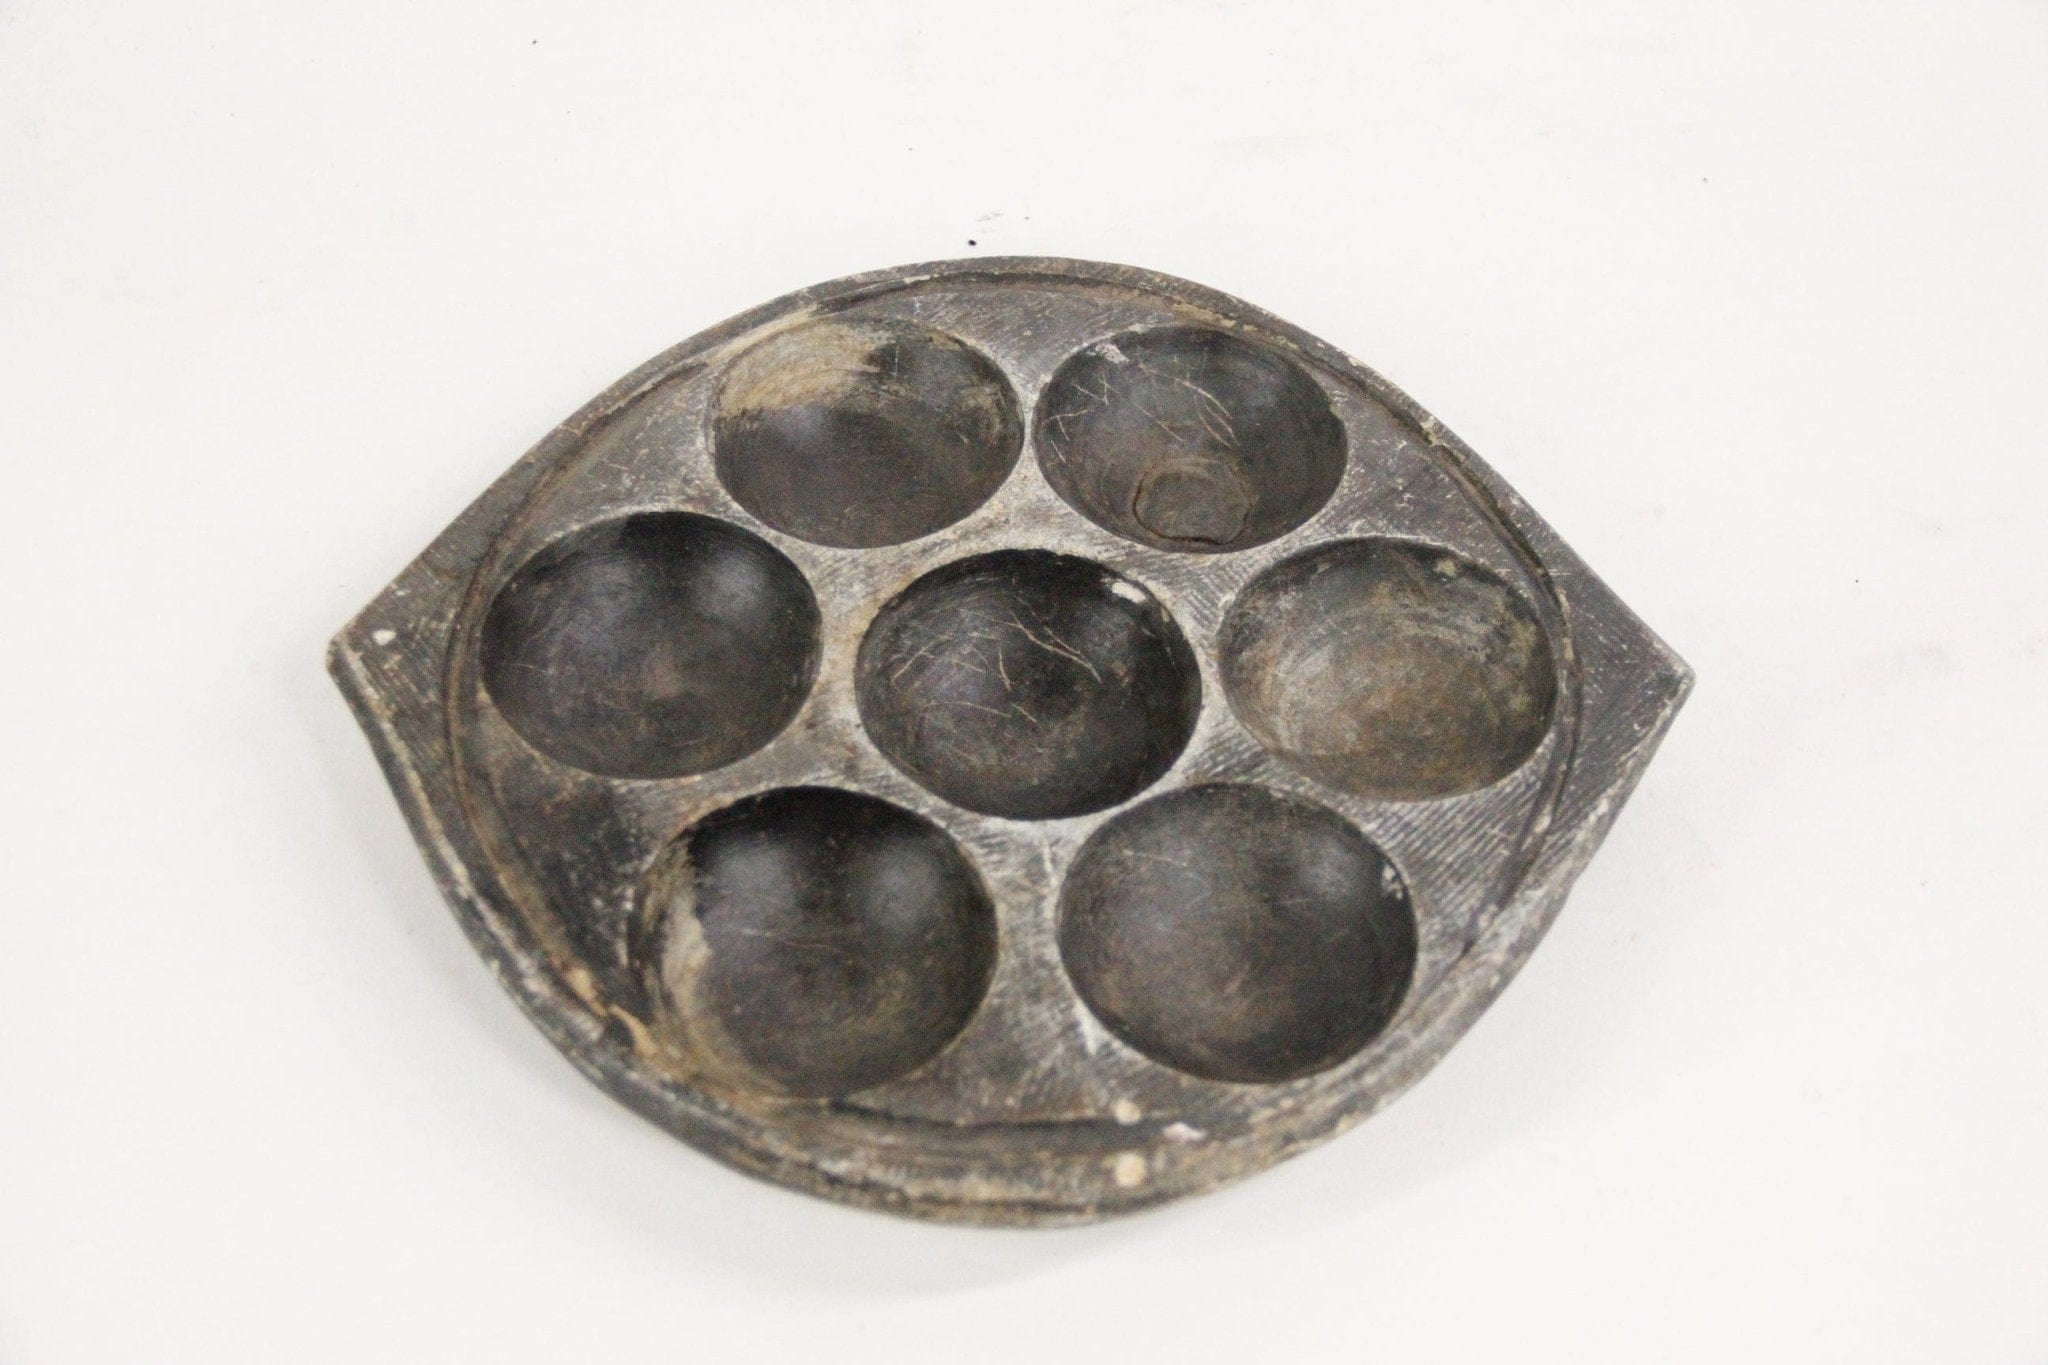 Antique Handcrafted Stone Tray | Divided Stone Tray - Debra Hall Lifestyle